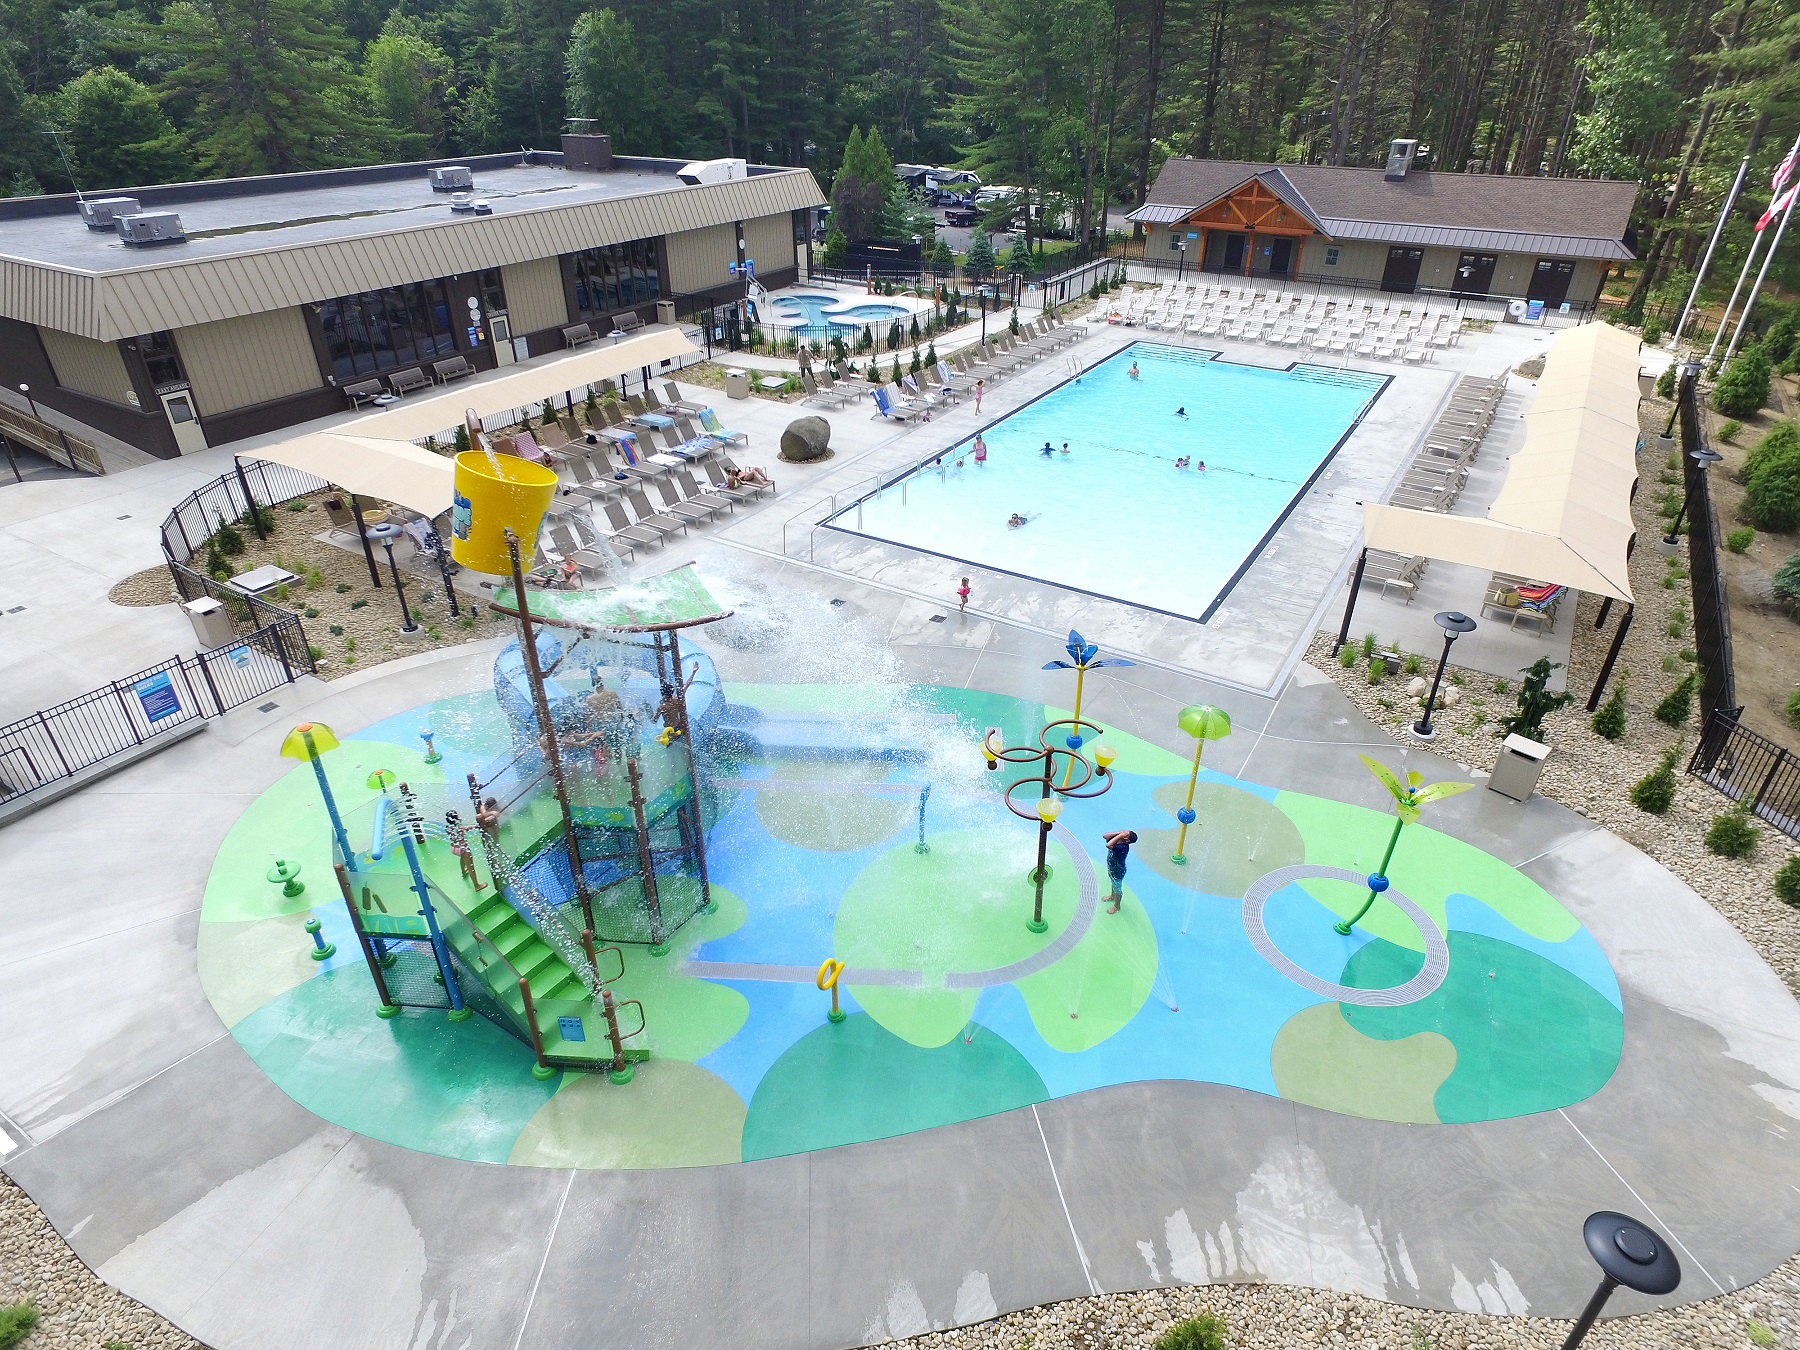 In the foreground the splash pad area is shown with children playing on the equipment. Behind the Splash Pad the zero entry pool is shown with people swimming in it and lounging in the chairs around it. In the far left of the photo the hot tub area is shown.